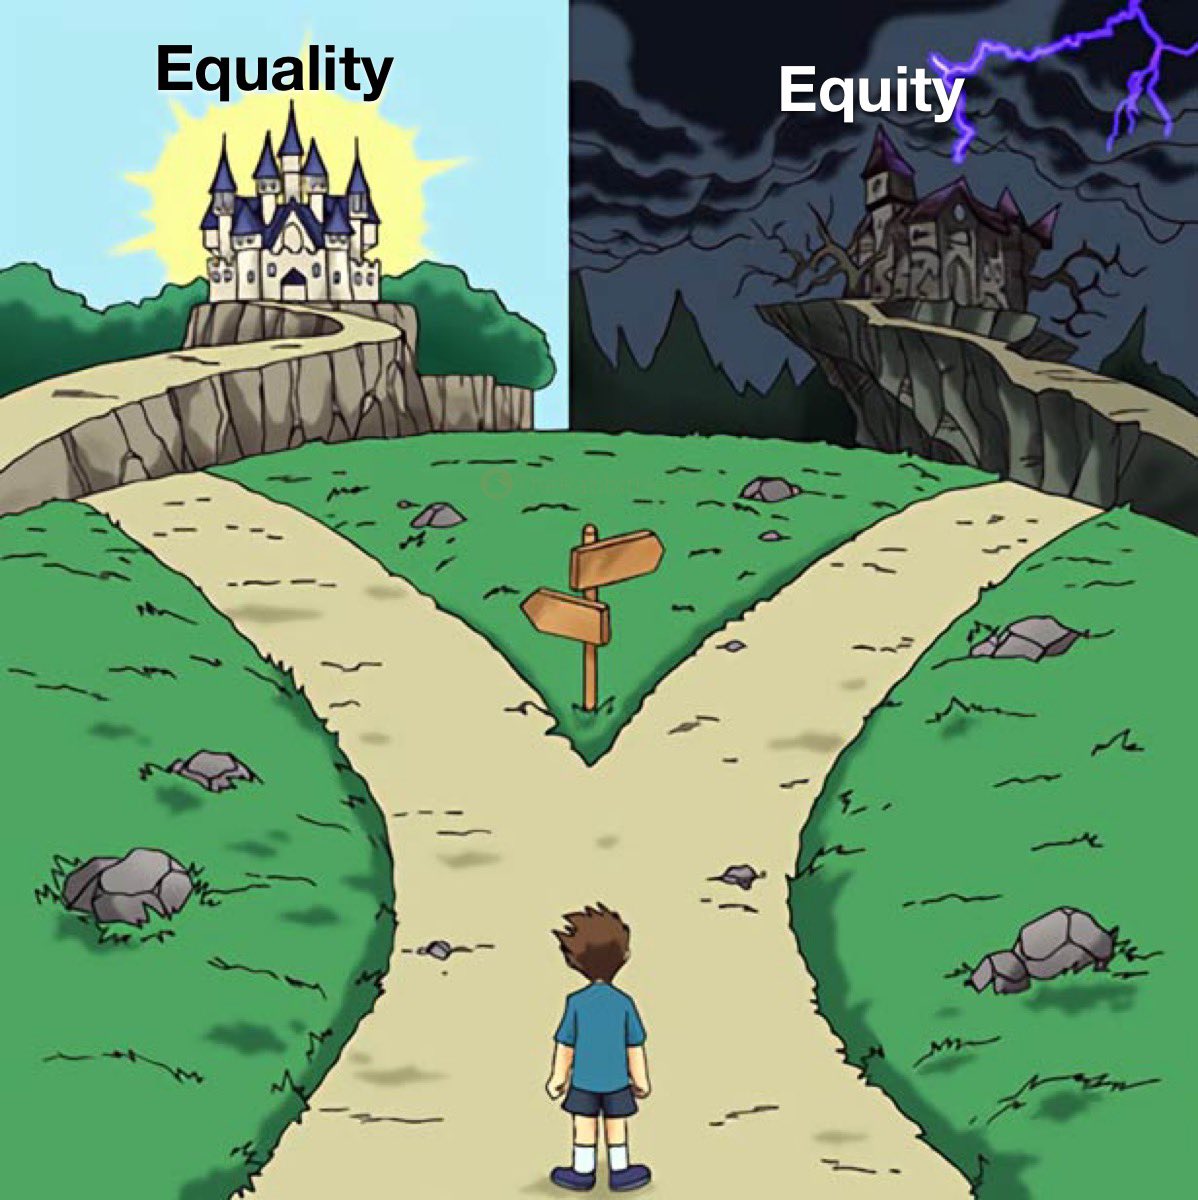 Which way? Do we want equal opportunity or equal outcomes?